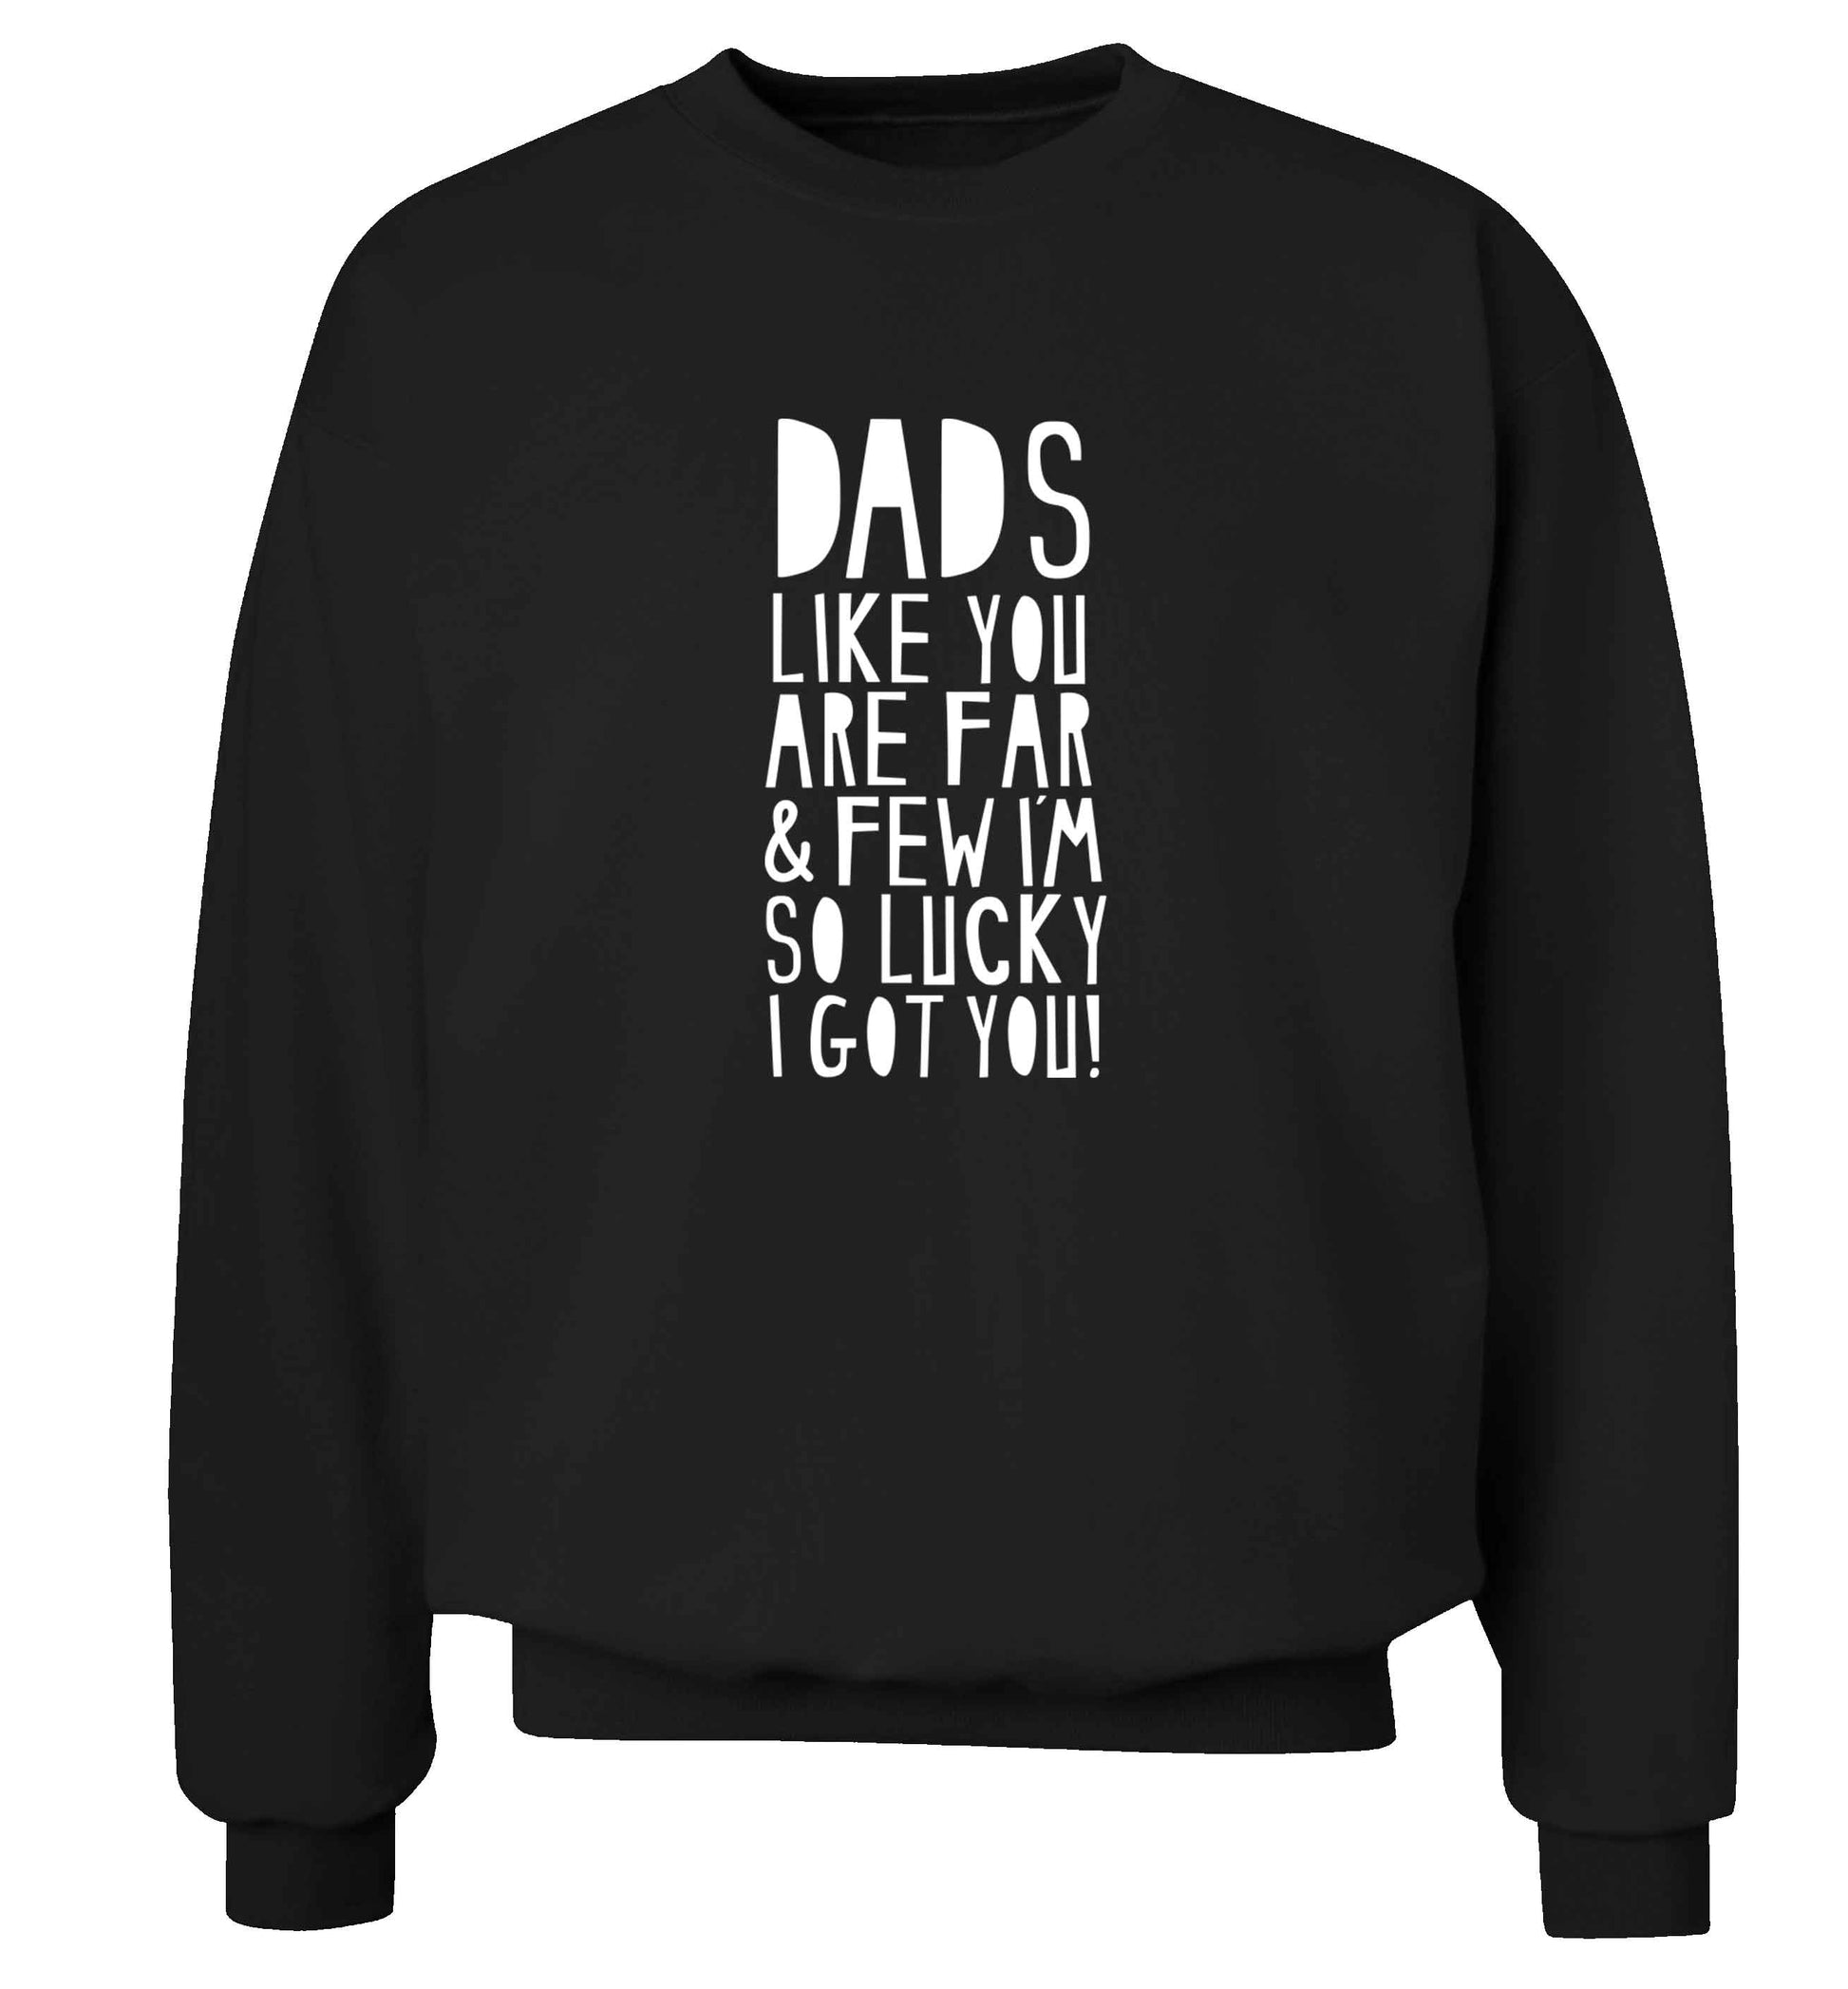 Dads like you are far and few I'm so luck I got you! adult's unisex black sweater 2XL